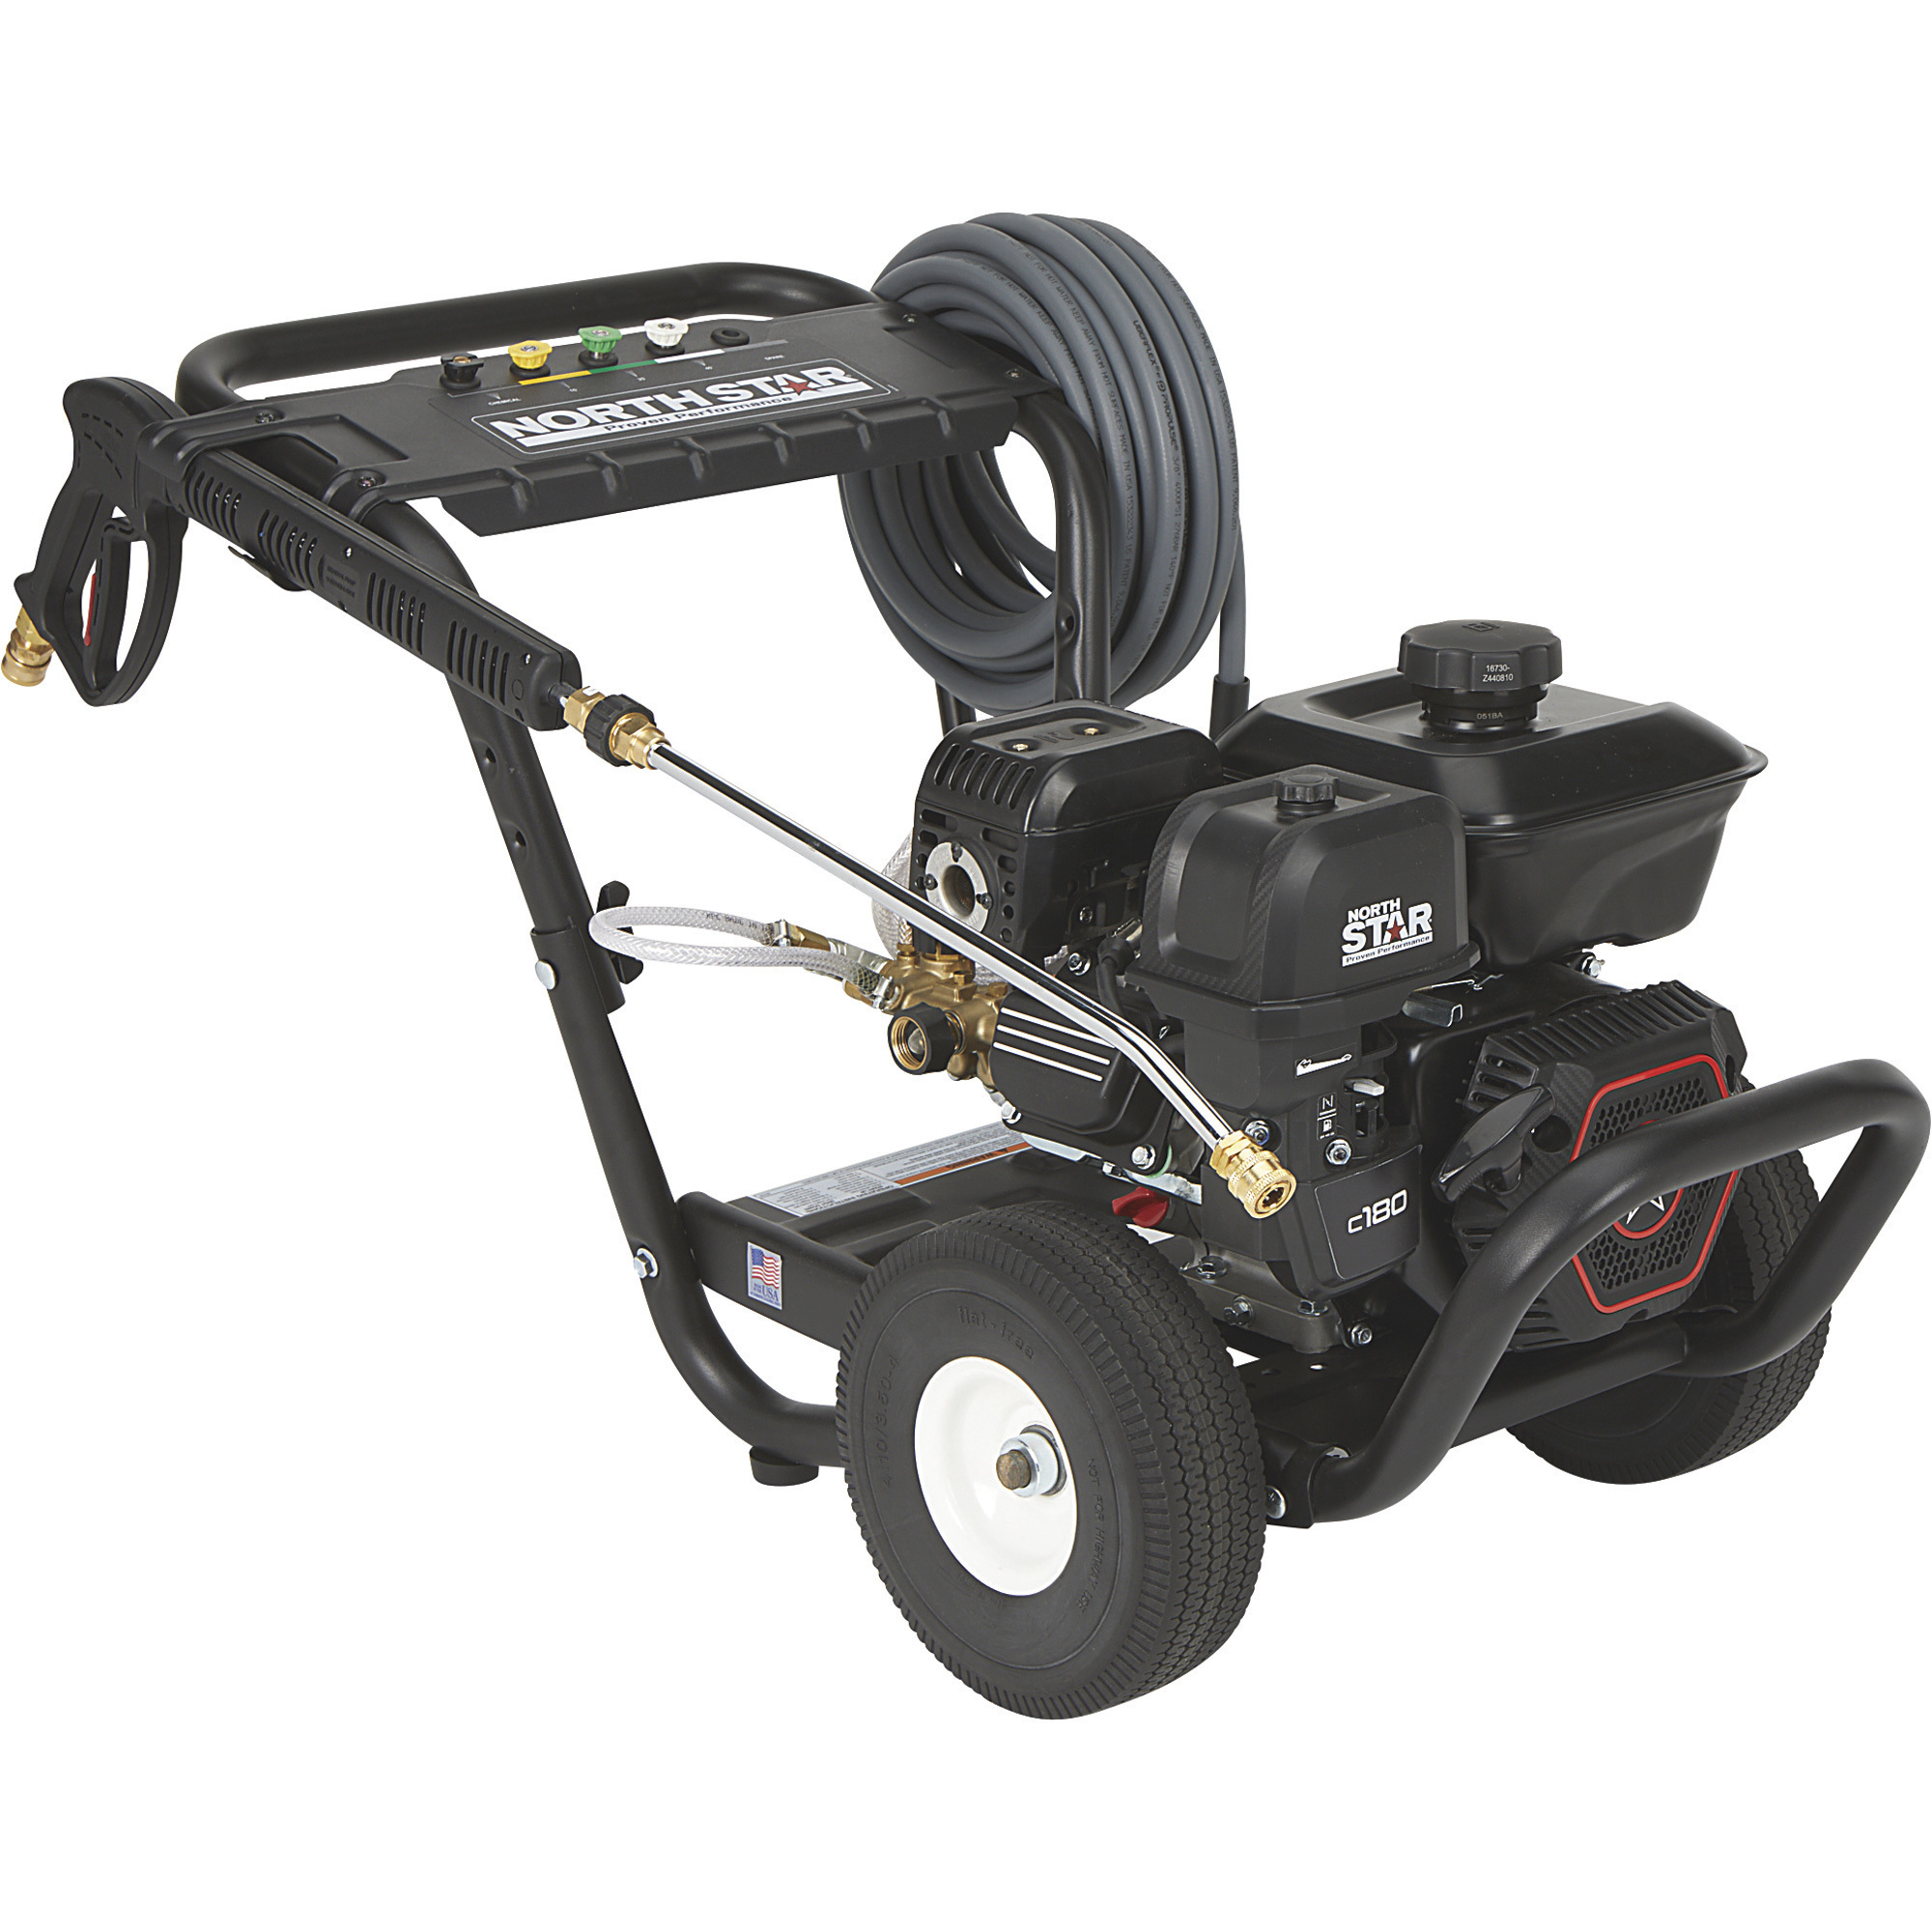 NorthStar Cold Water Pressure Washer, 3100 PSI, 2.5 GPM